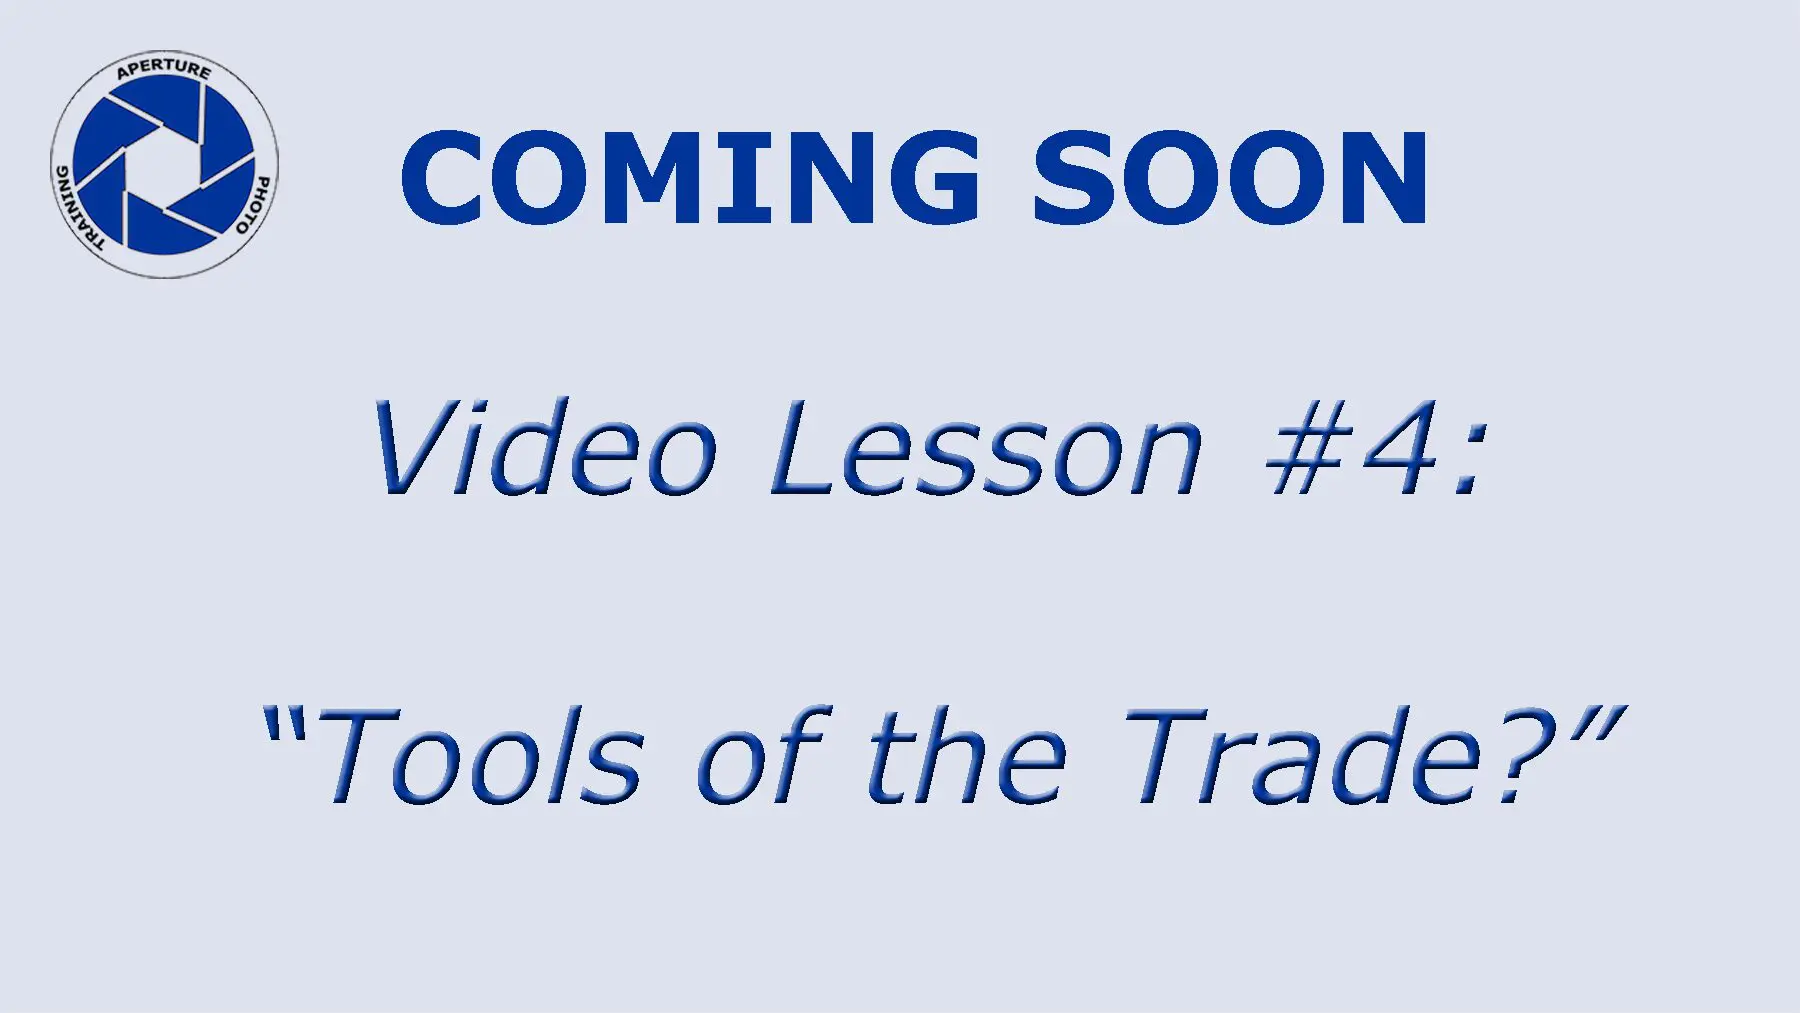 Text about a video lesson titled “Tools of the Trade?”